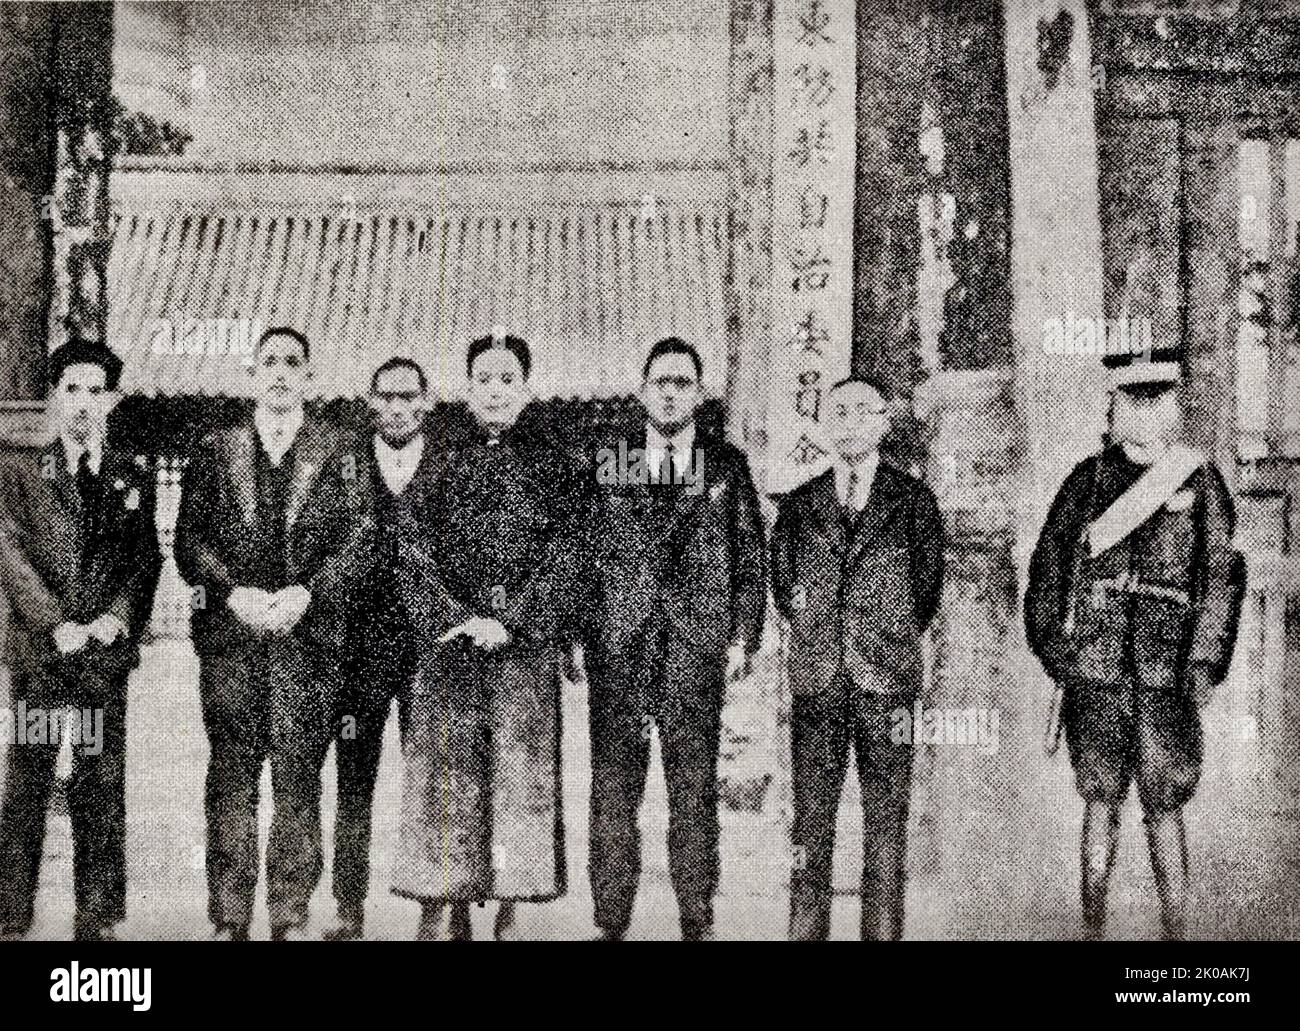 In November, a traitor to China, Yin Rugeng, starts the 'Autonomy movement of the Hubei Five Provinces (Hebei, Shandong, Shanxi, Chahaer, Suiyuan)', and establishes 'Anti- Communist Ji dong Autonomy Government! Pictured are Yin Rugeng (fourth to the left) among other traitors. Stock Photo